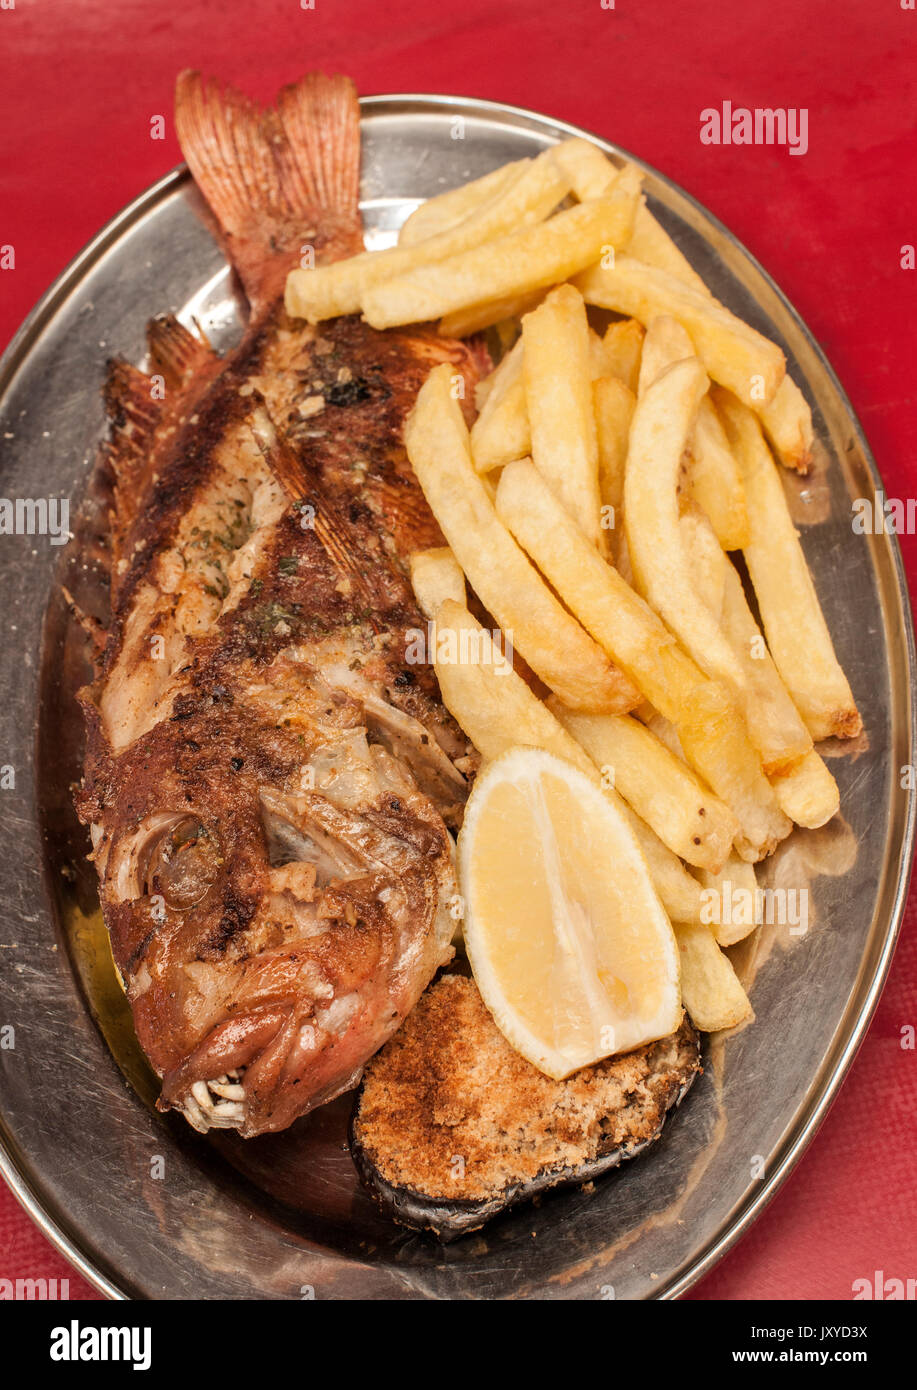 Grilled Red Roman fish as served at Kalky's restaurant in Kalk Bay, Cape Town. Stock Photo